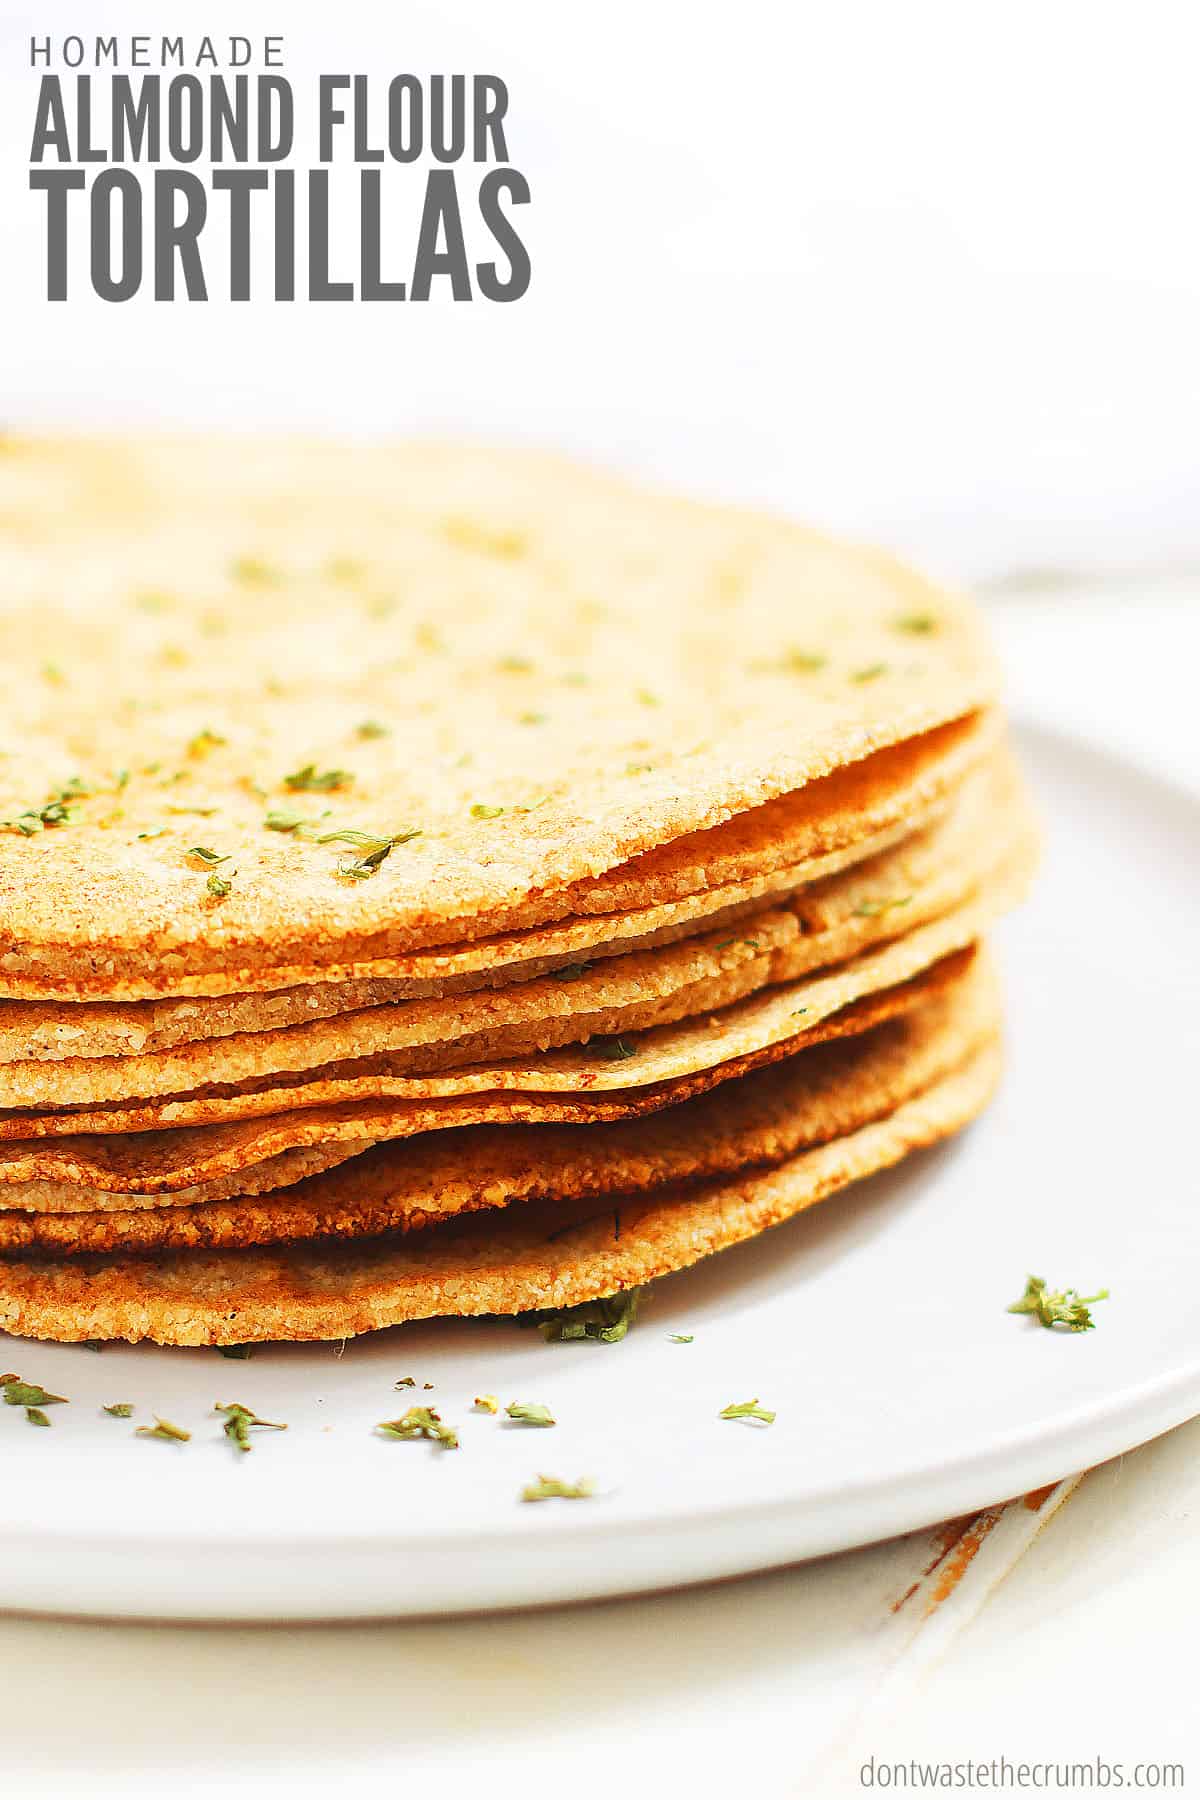 A stack of fresh homemade almond flour tortillas, sprinkled with a garnish of parsley. Text overlay reads "Homemade Almond Flour Tortillas."